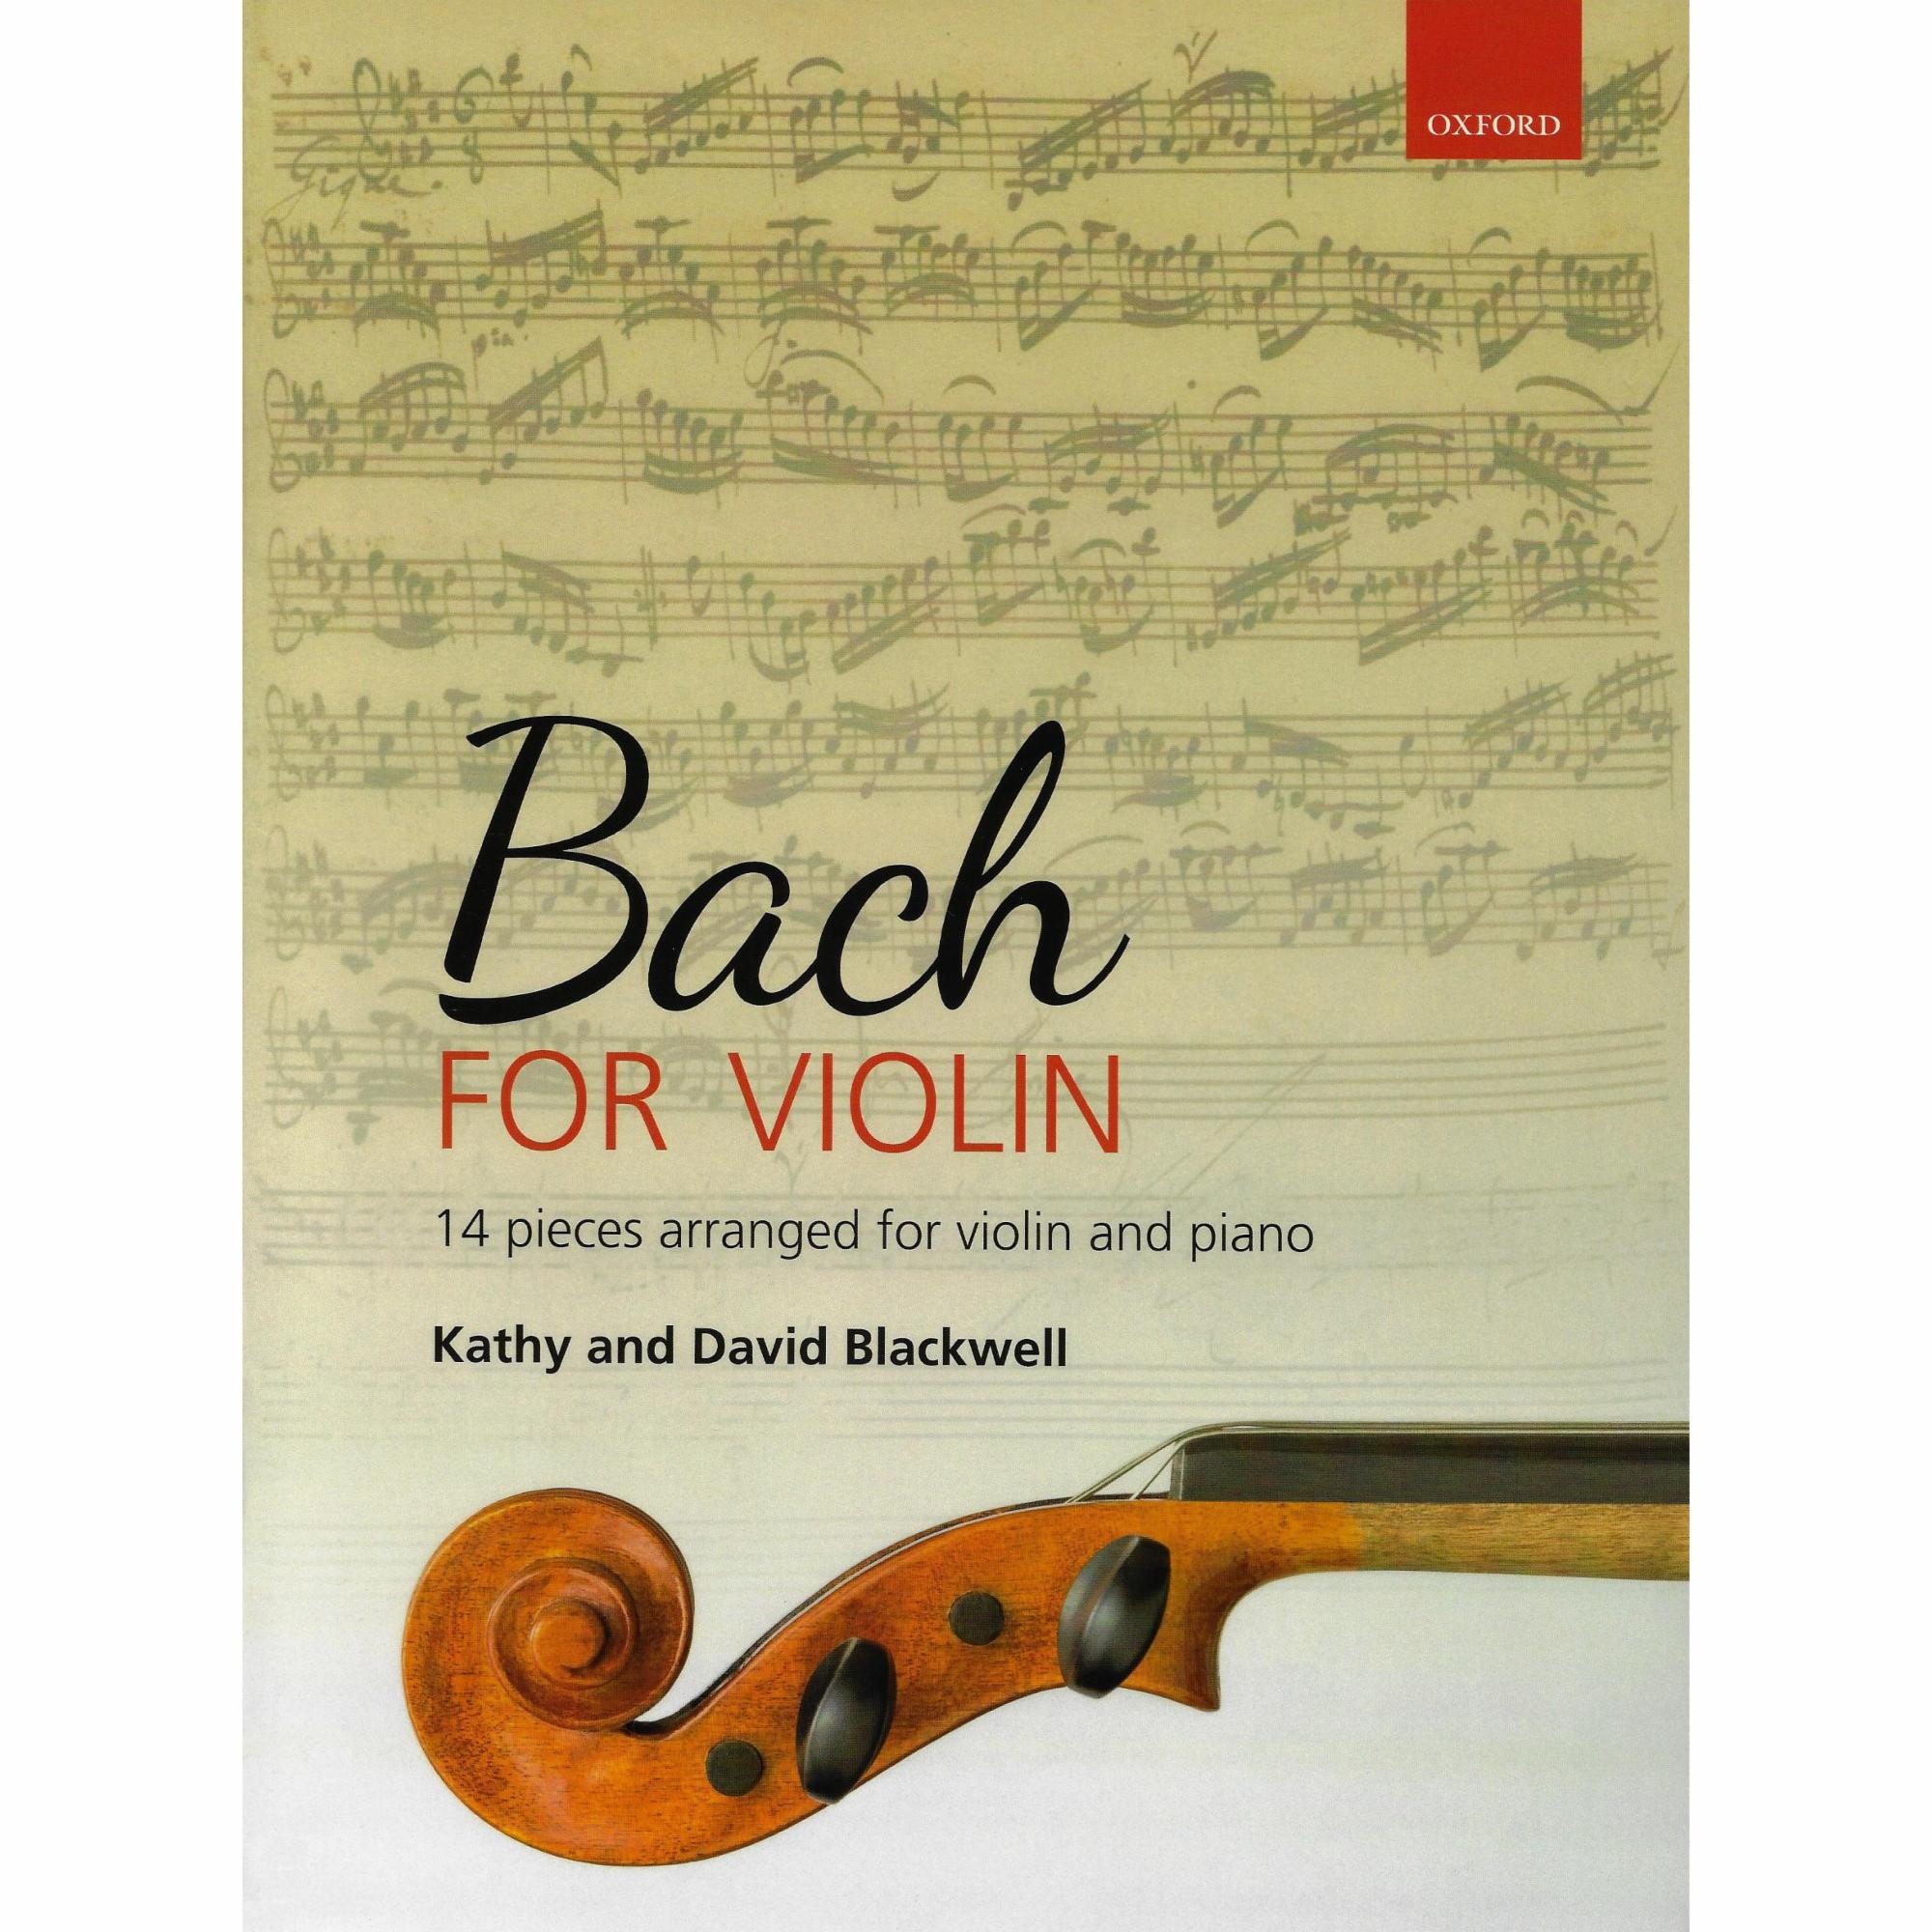 Bach for Violin: 14 Pieces Arranged for Violin and Piano